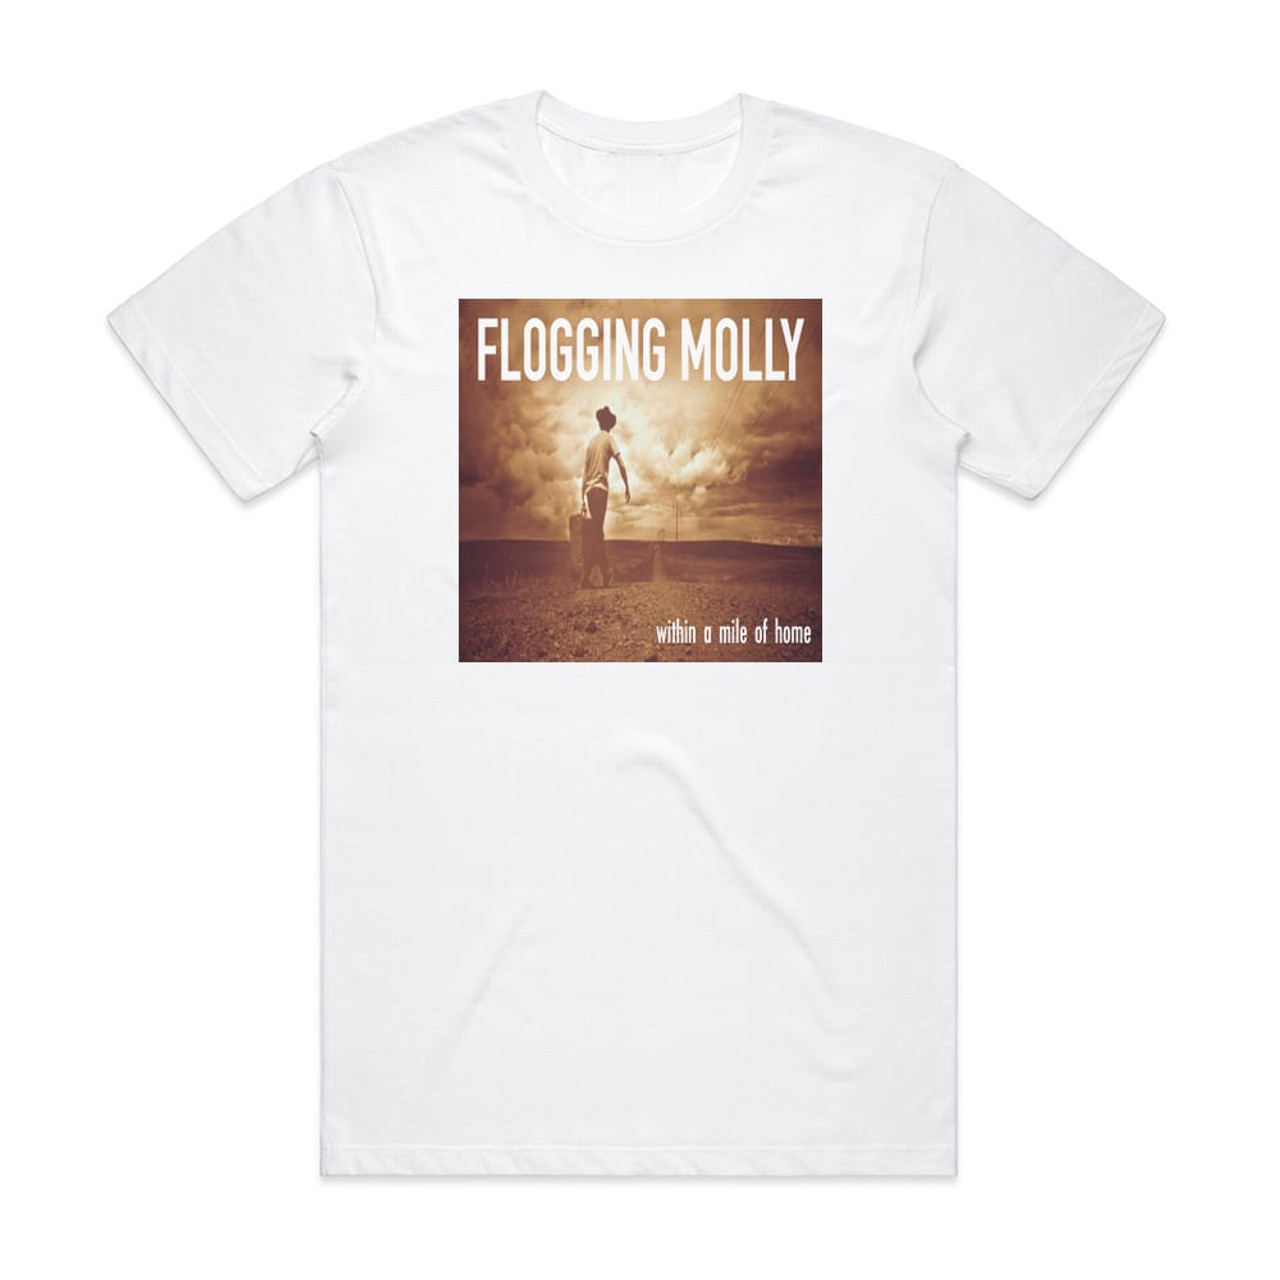 Mile　Flogging　Of　Molly　White　Within　A　Home　Album　Cover　T-Shirt